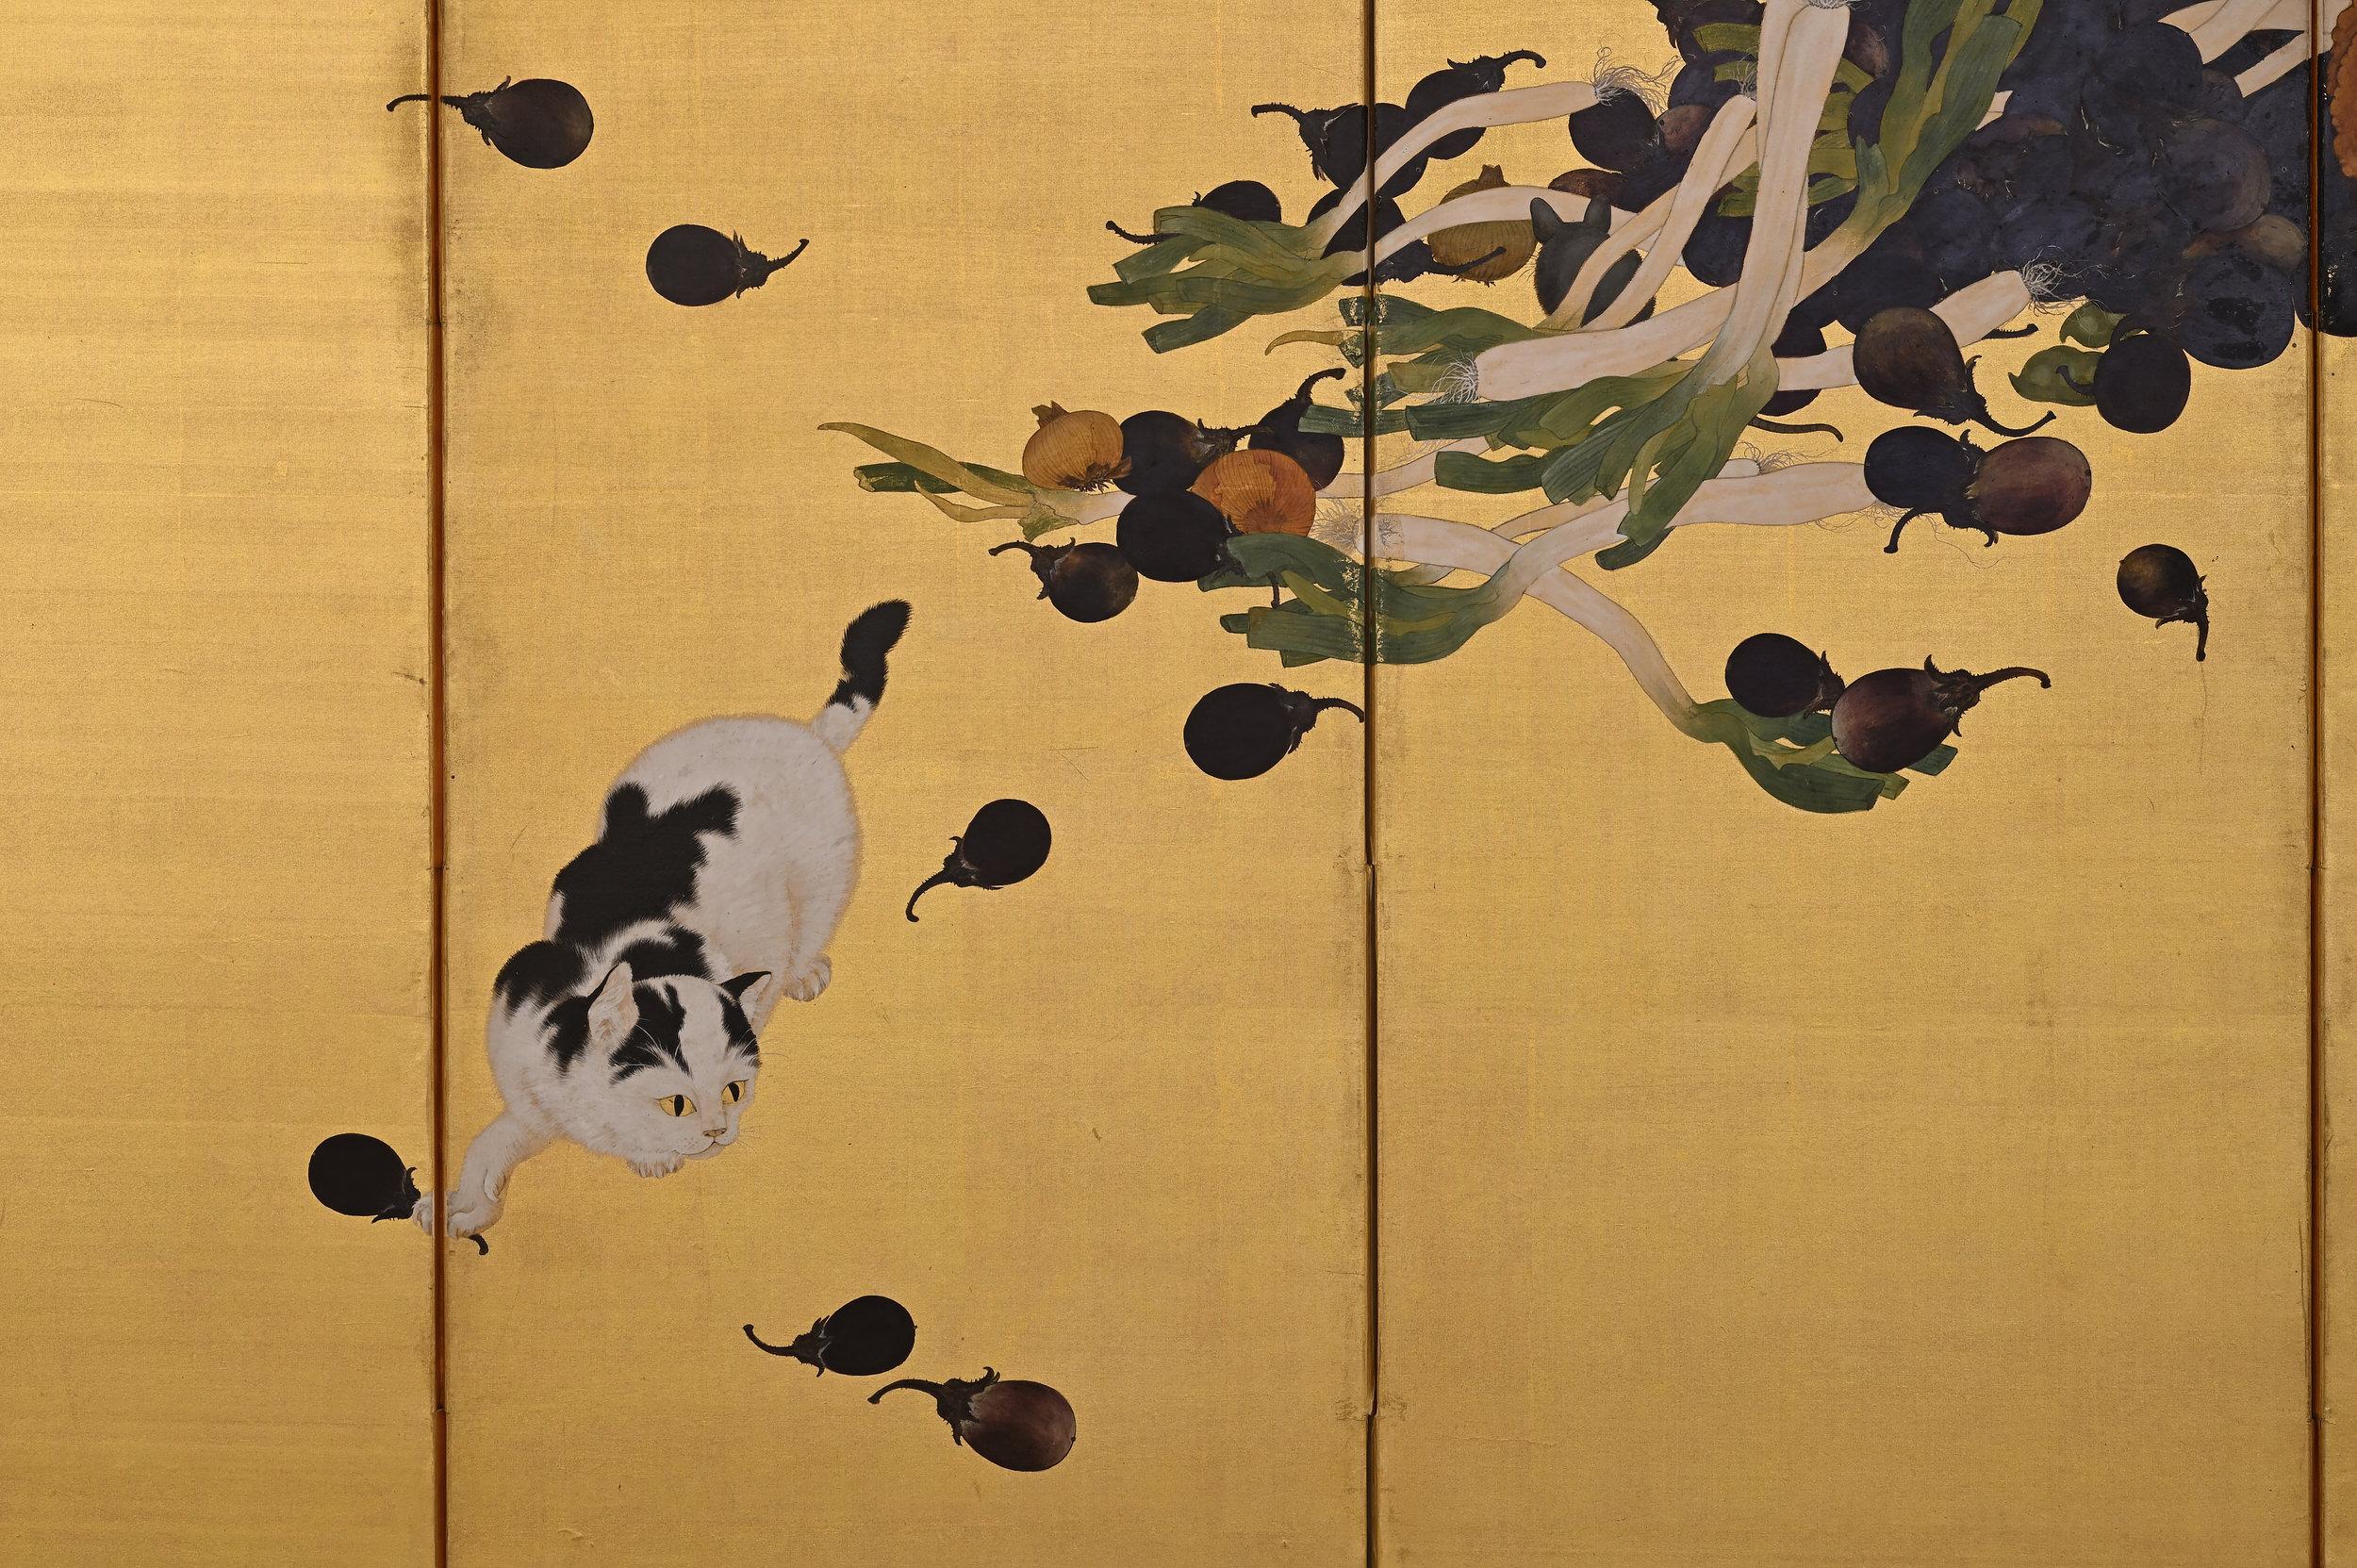 The narrative playfulness of the scene depicted on this Japanese screen sets alight what is at its core a celebration of a bountiful harvest. The screen offers a visual representation of the abundance of nature and the wish for ongoing prosperity.